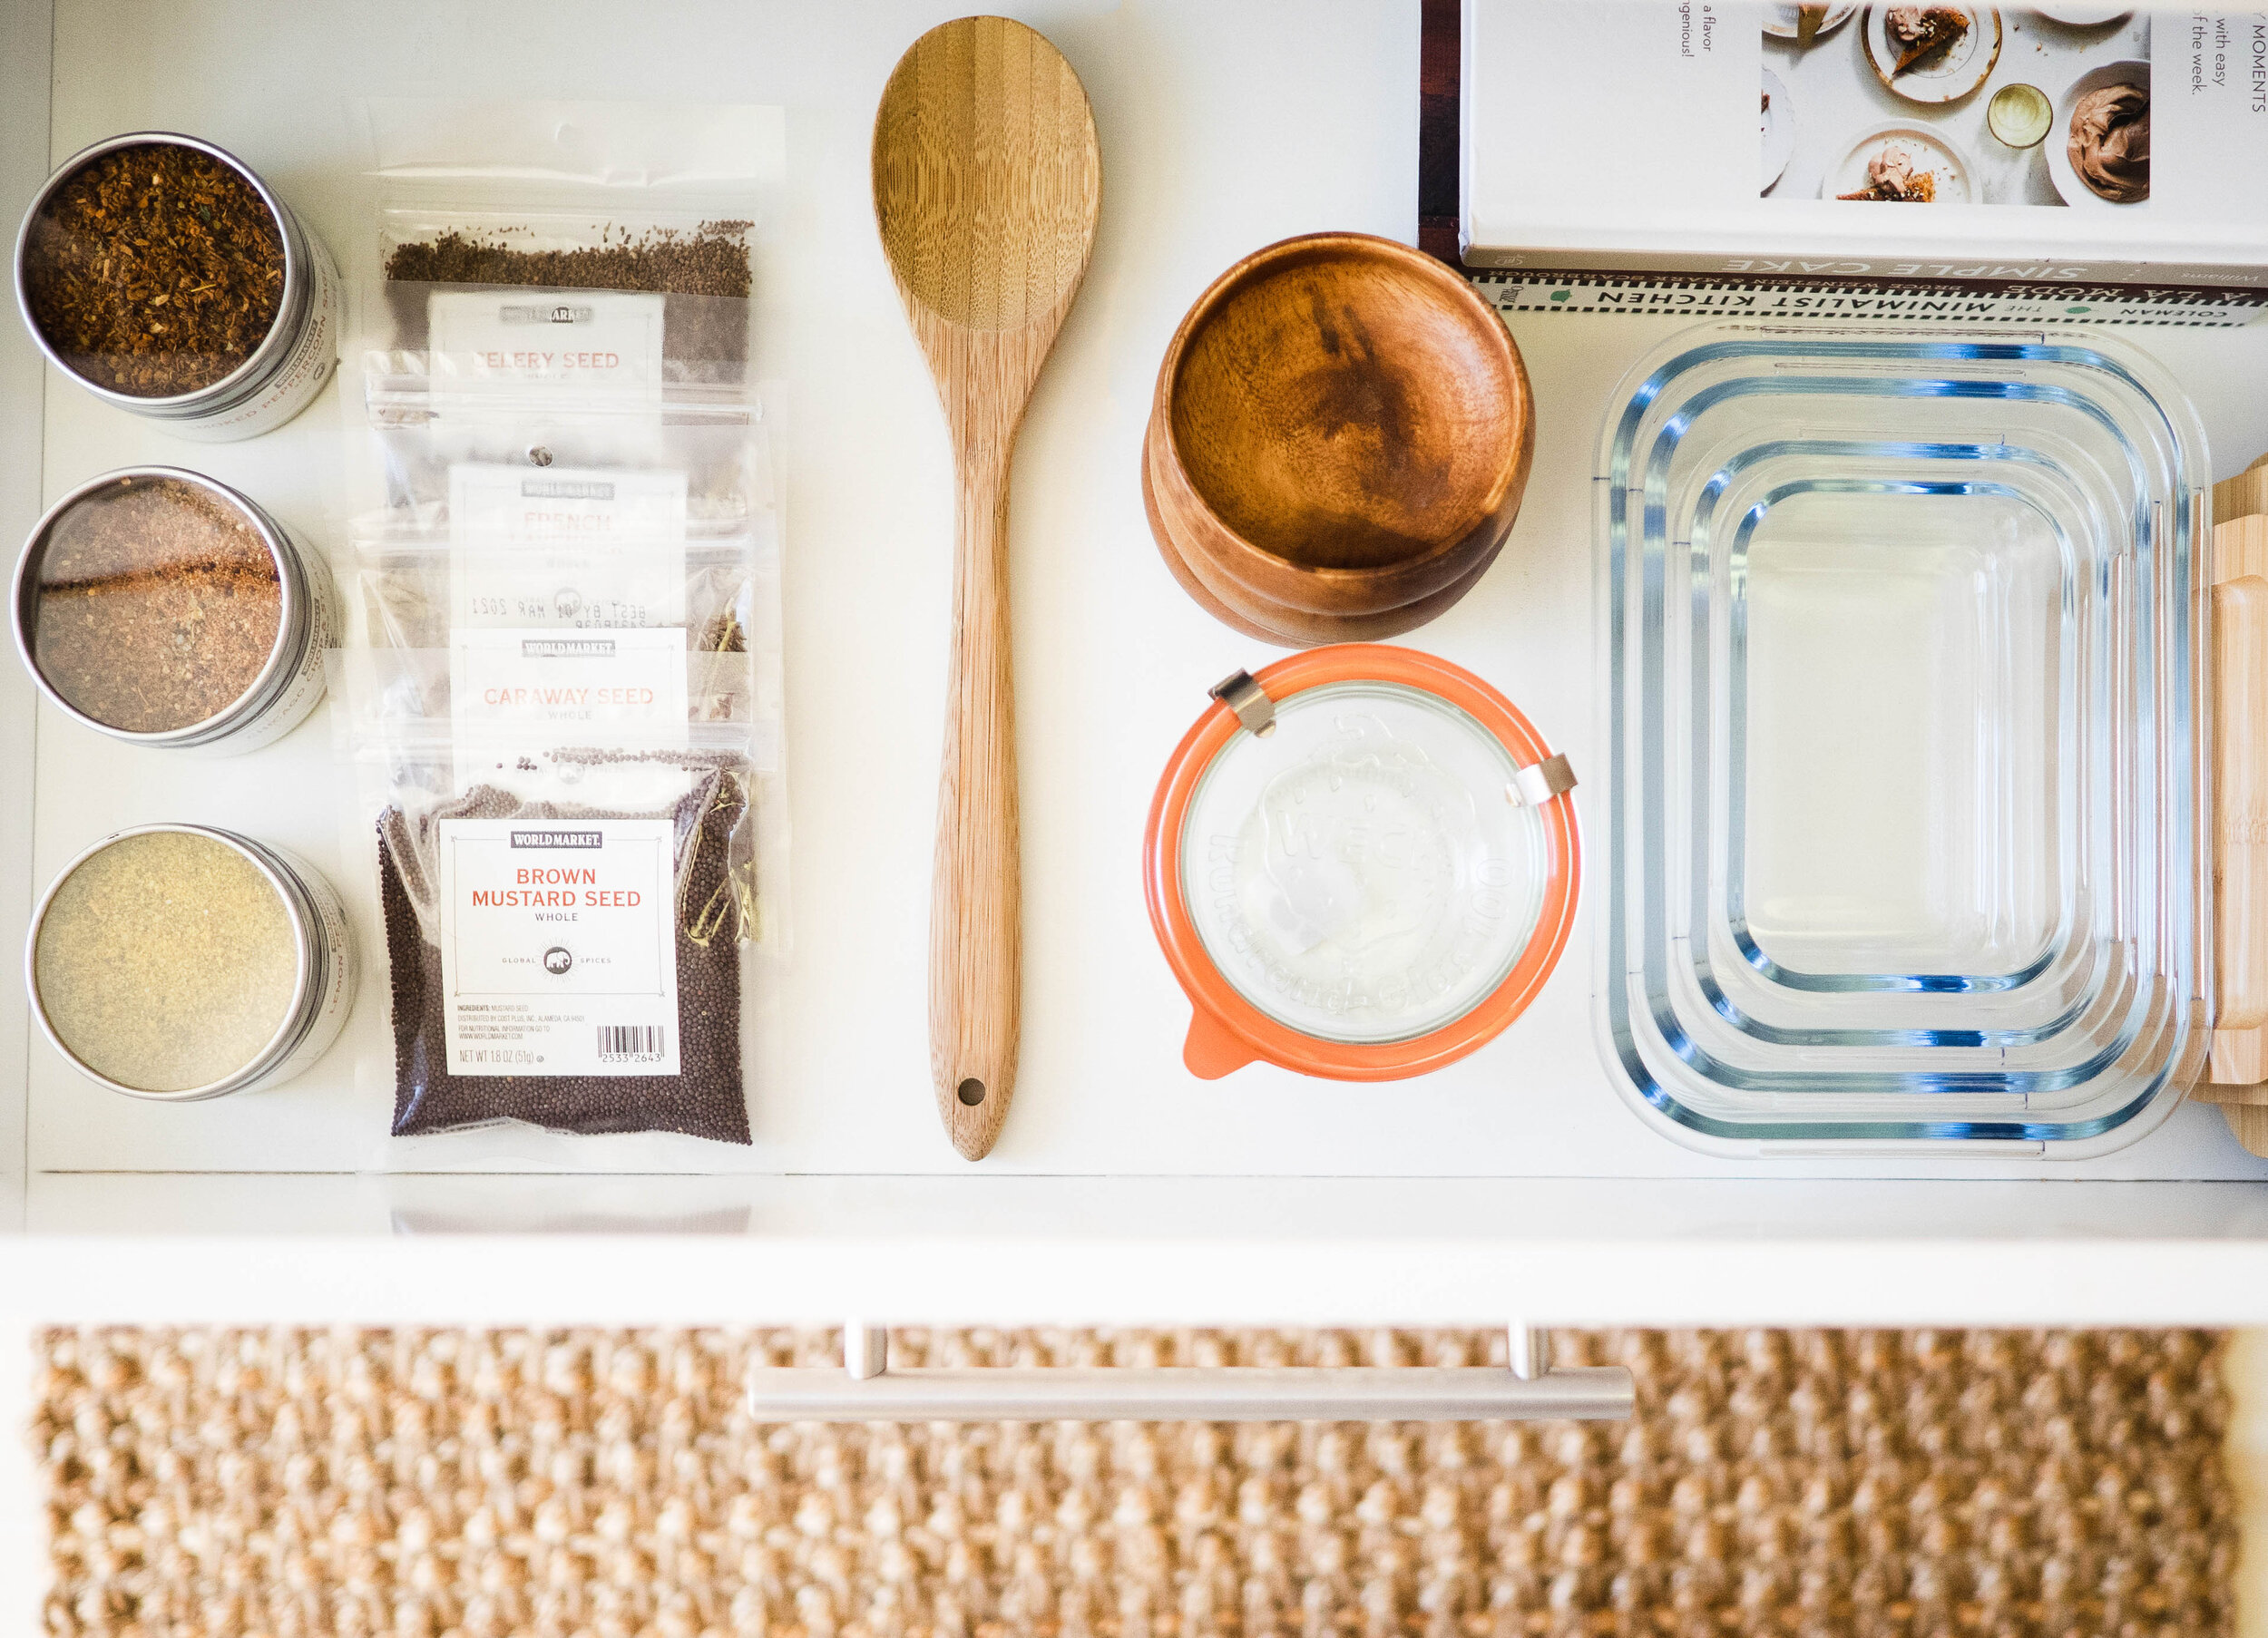 Healthy Home: How To Organize Your Kitchen Spice Cabinet